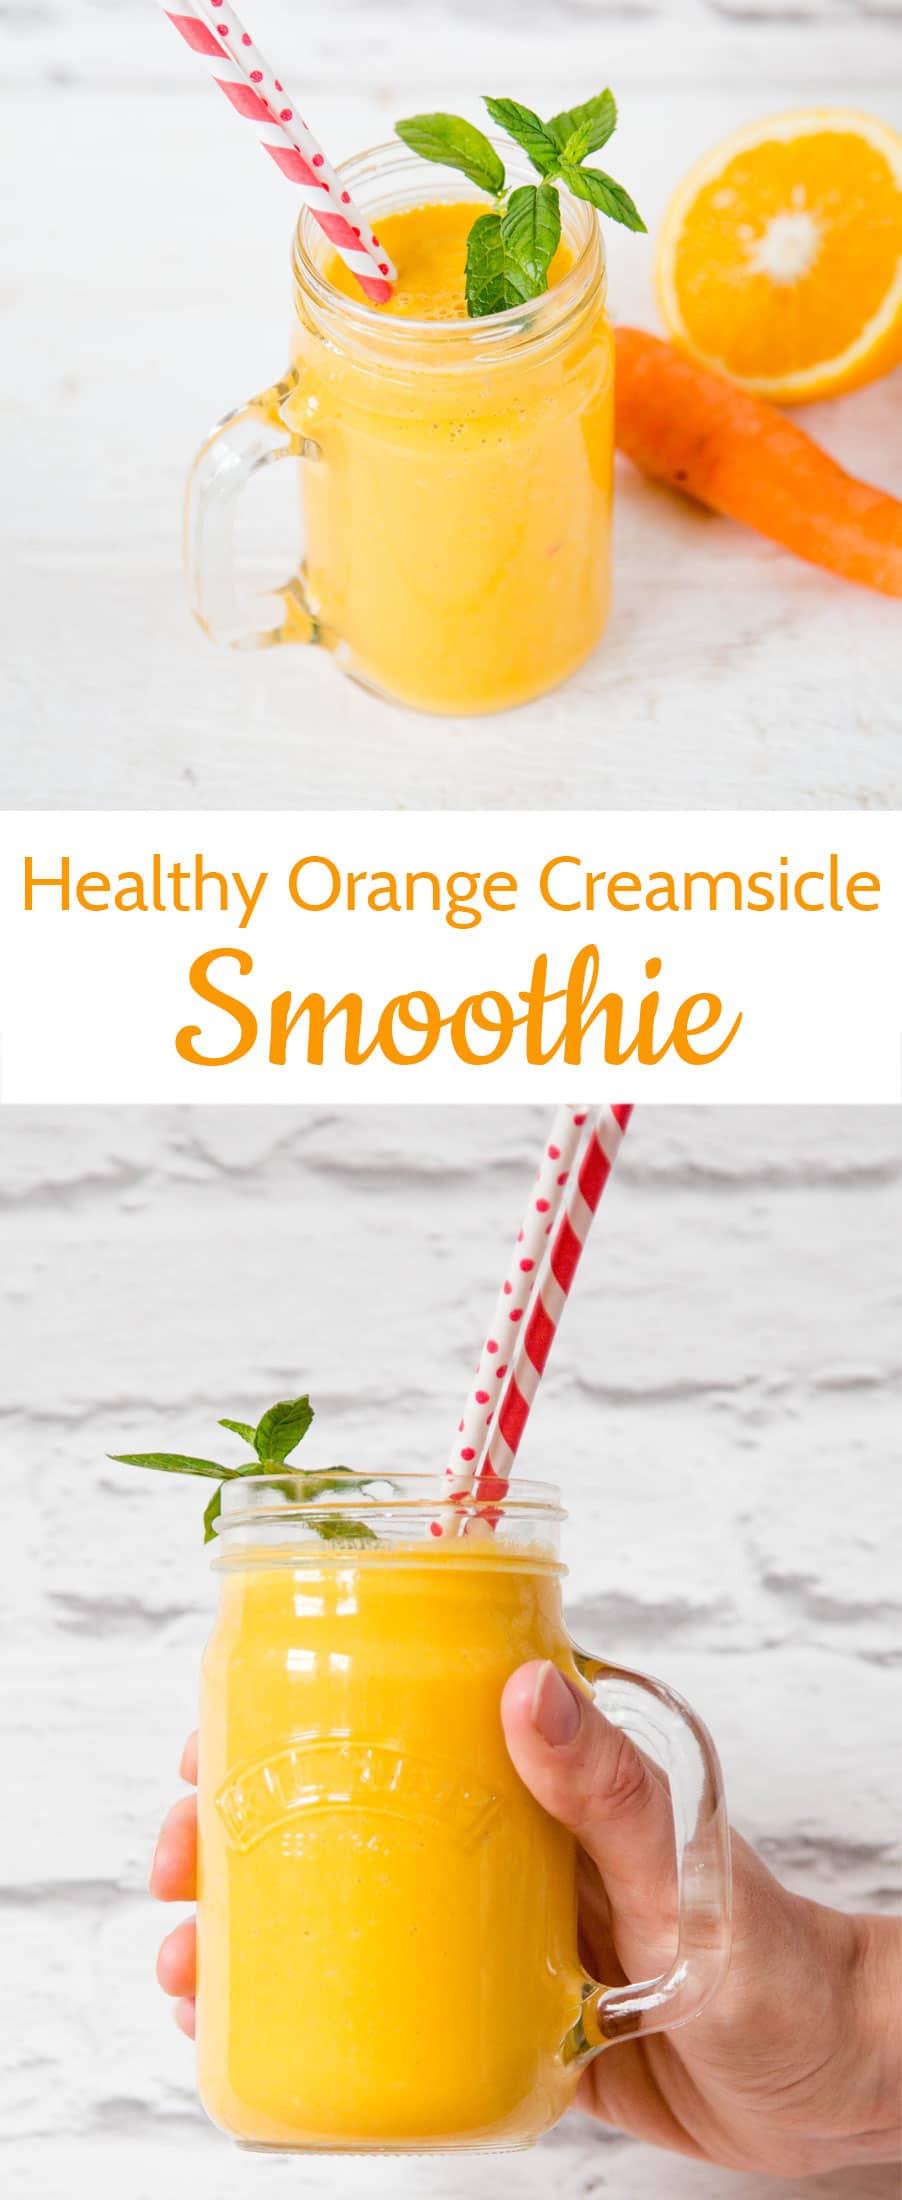 This 4 ingredient healthy orange creamsicle smoothie tastes just like an ice cream and contains carrot, kefir and only one portion of fruit